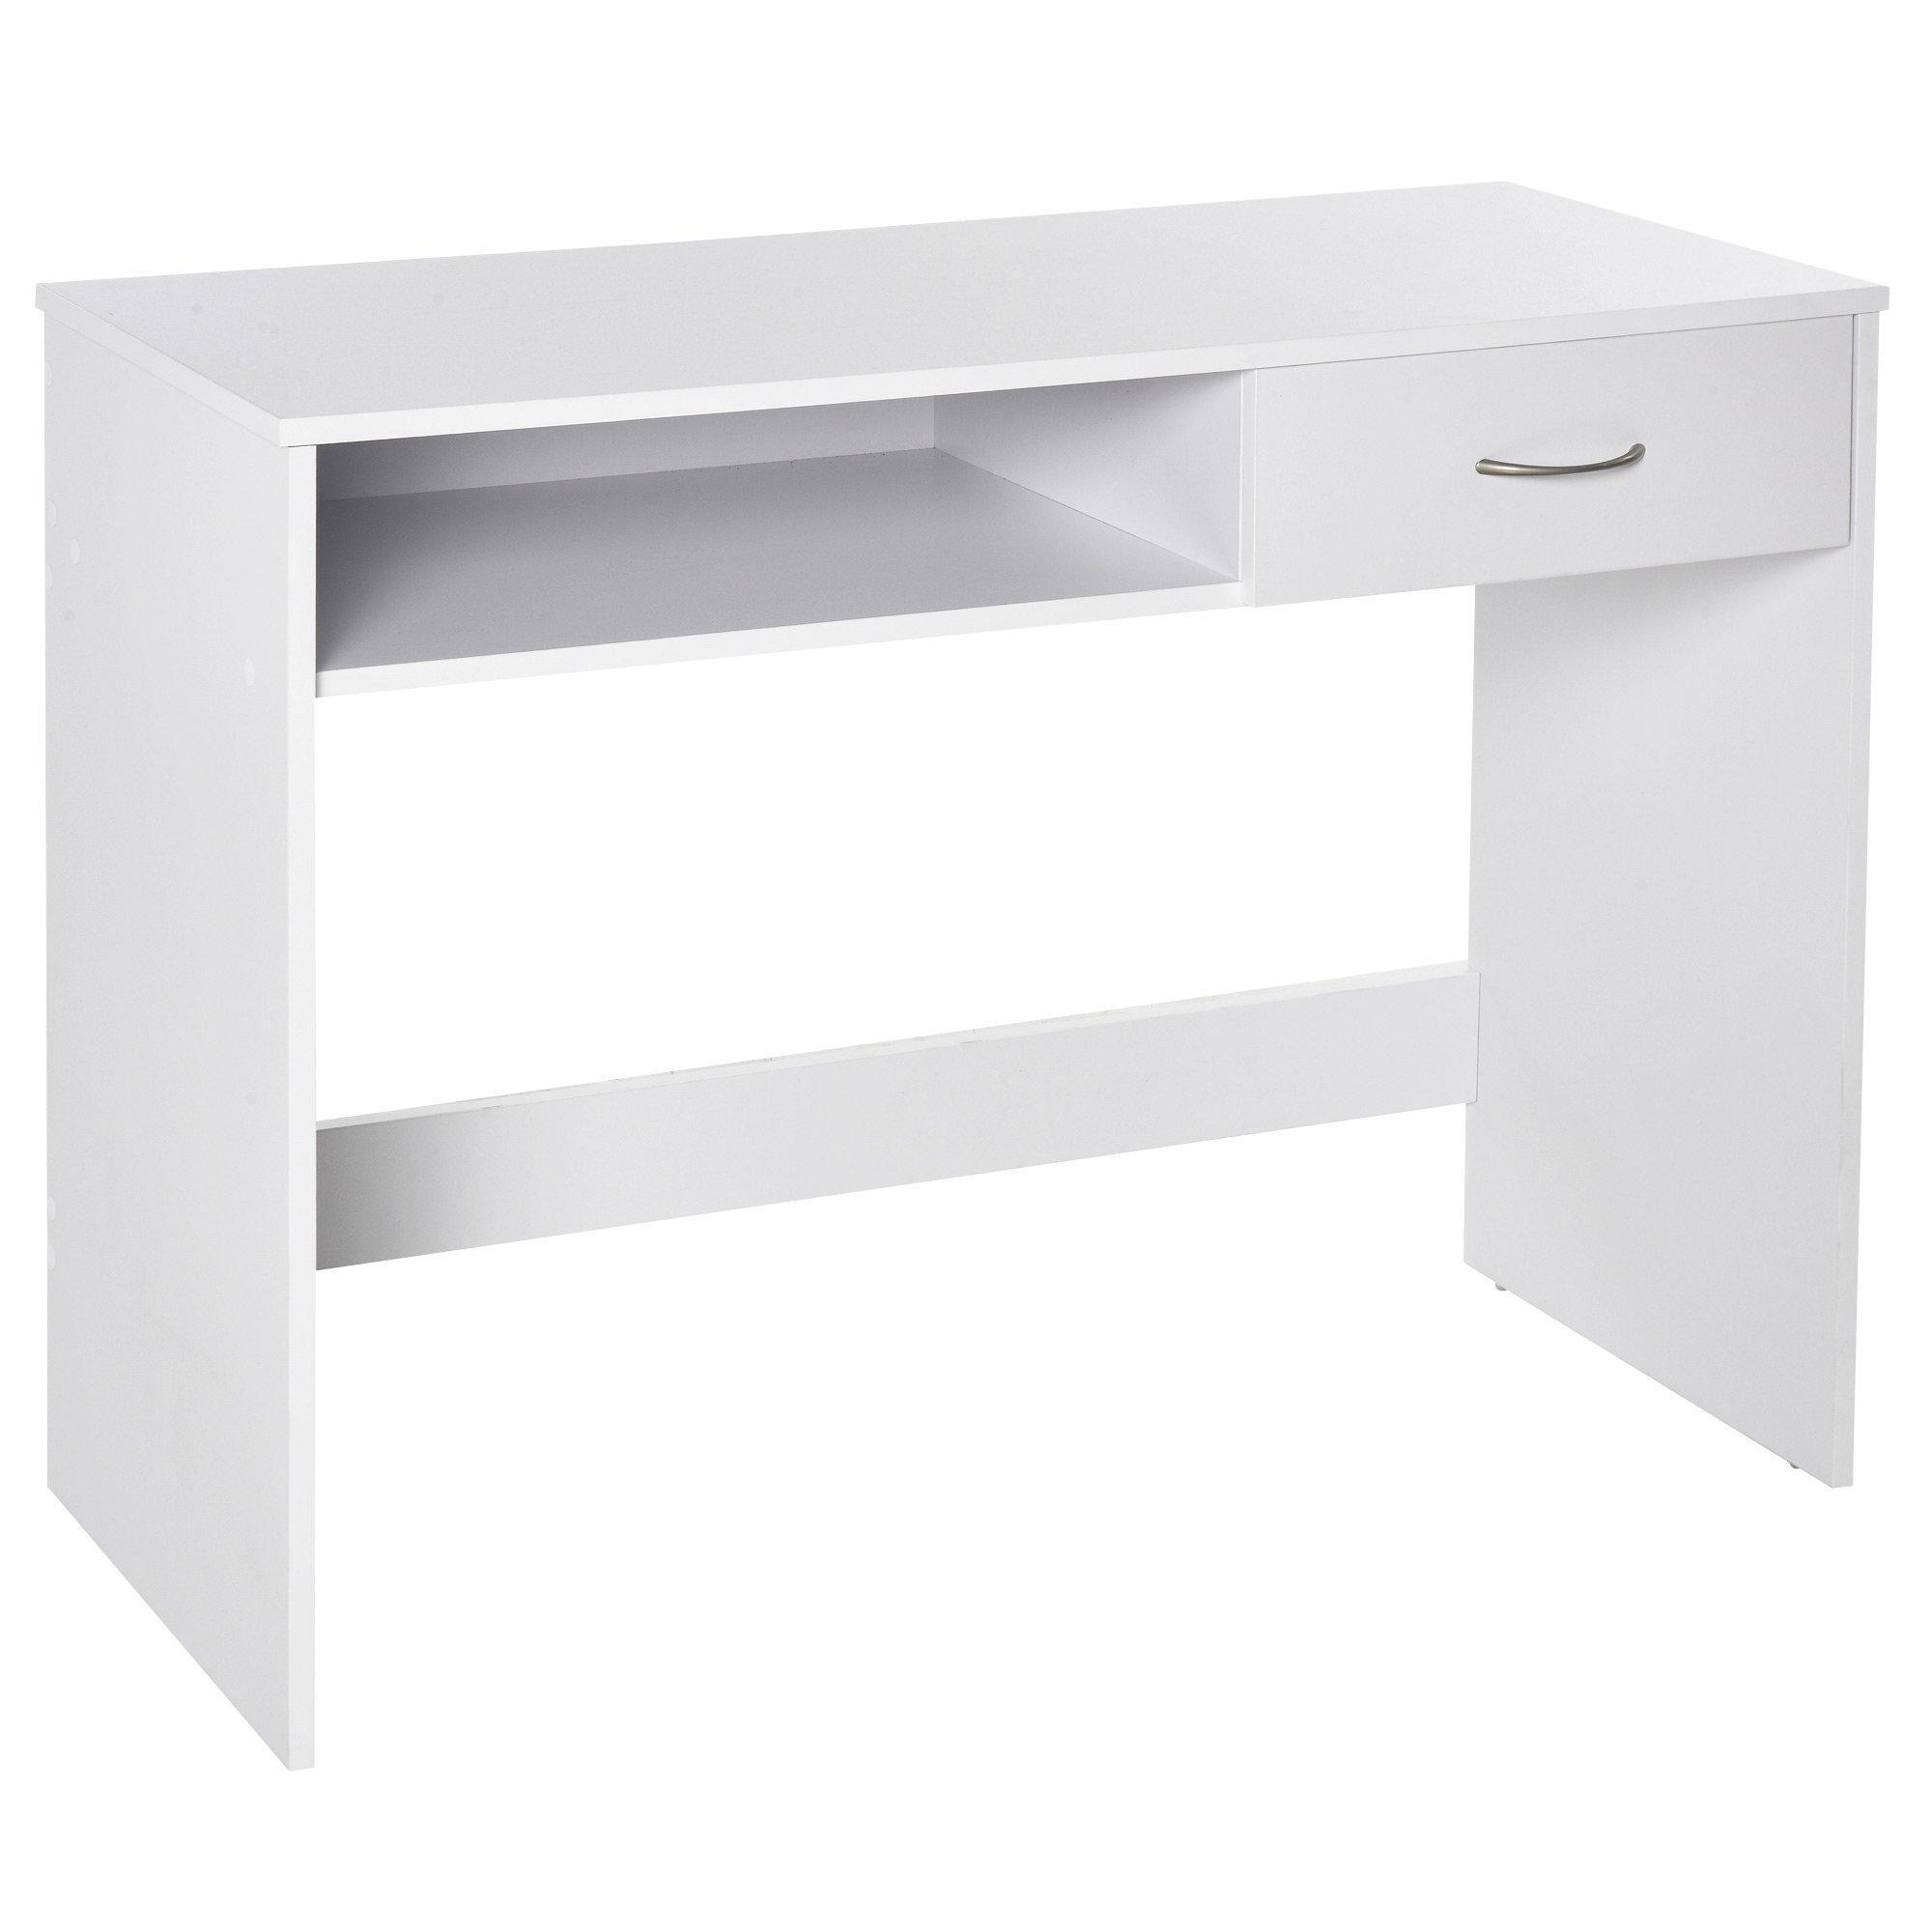 Modern Computer Work Desk Table Study with Shelf Drawer Writing Station - image 1